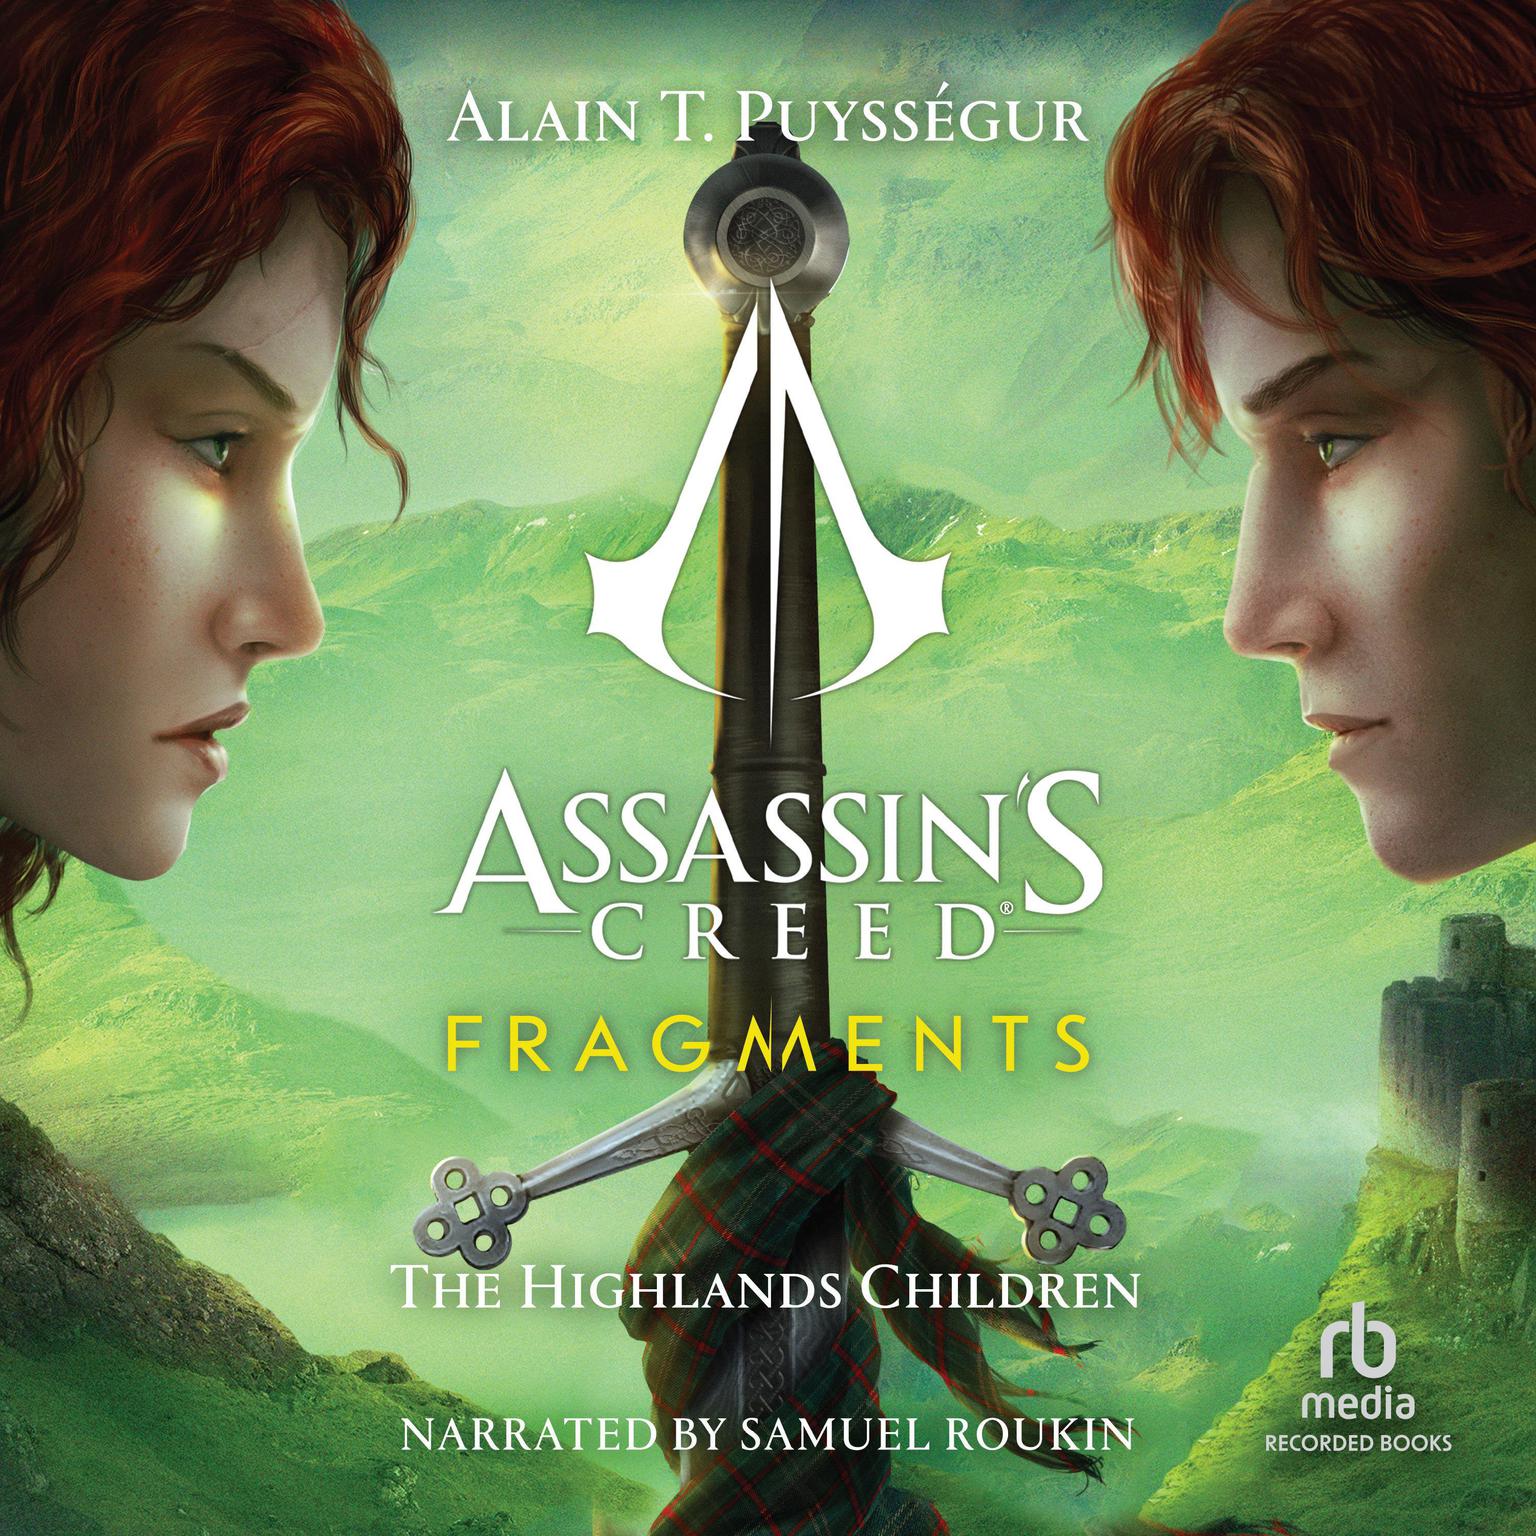 Assassins Creed: Fragments: The Highlands Children (Les enfants des Highlands): Les Enfants des Highlands Audiobook, by Alain T. Puyssegur